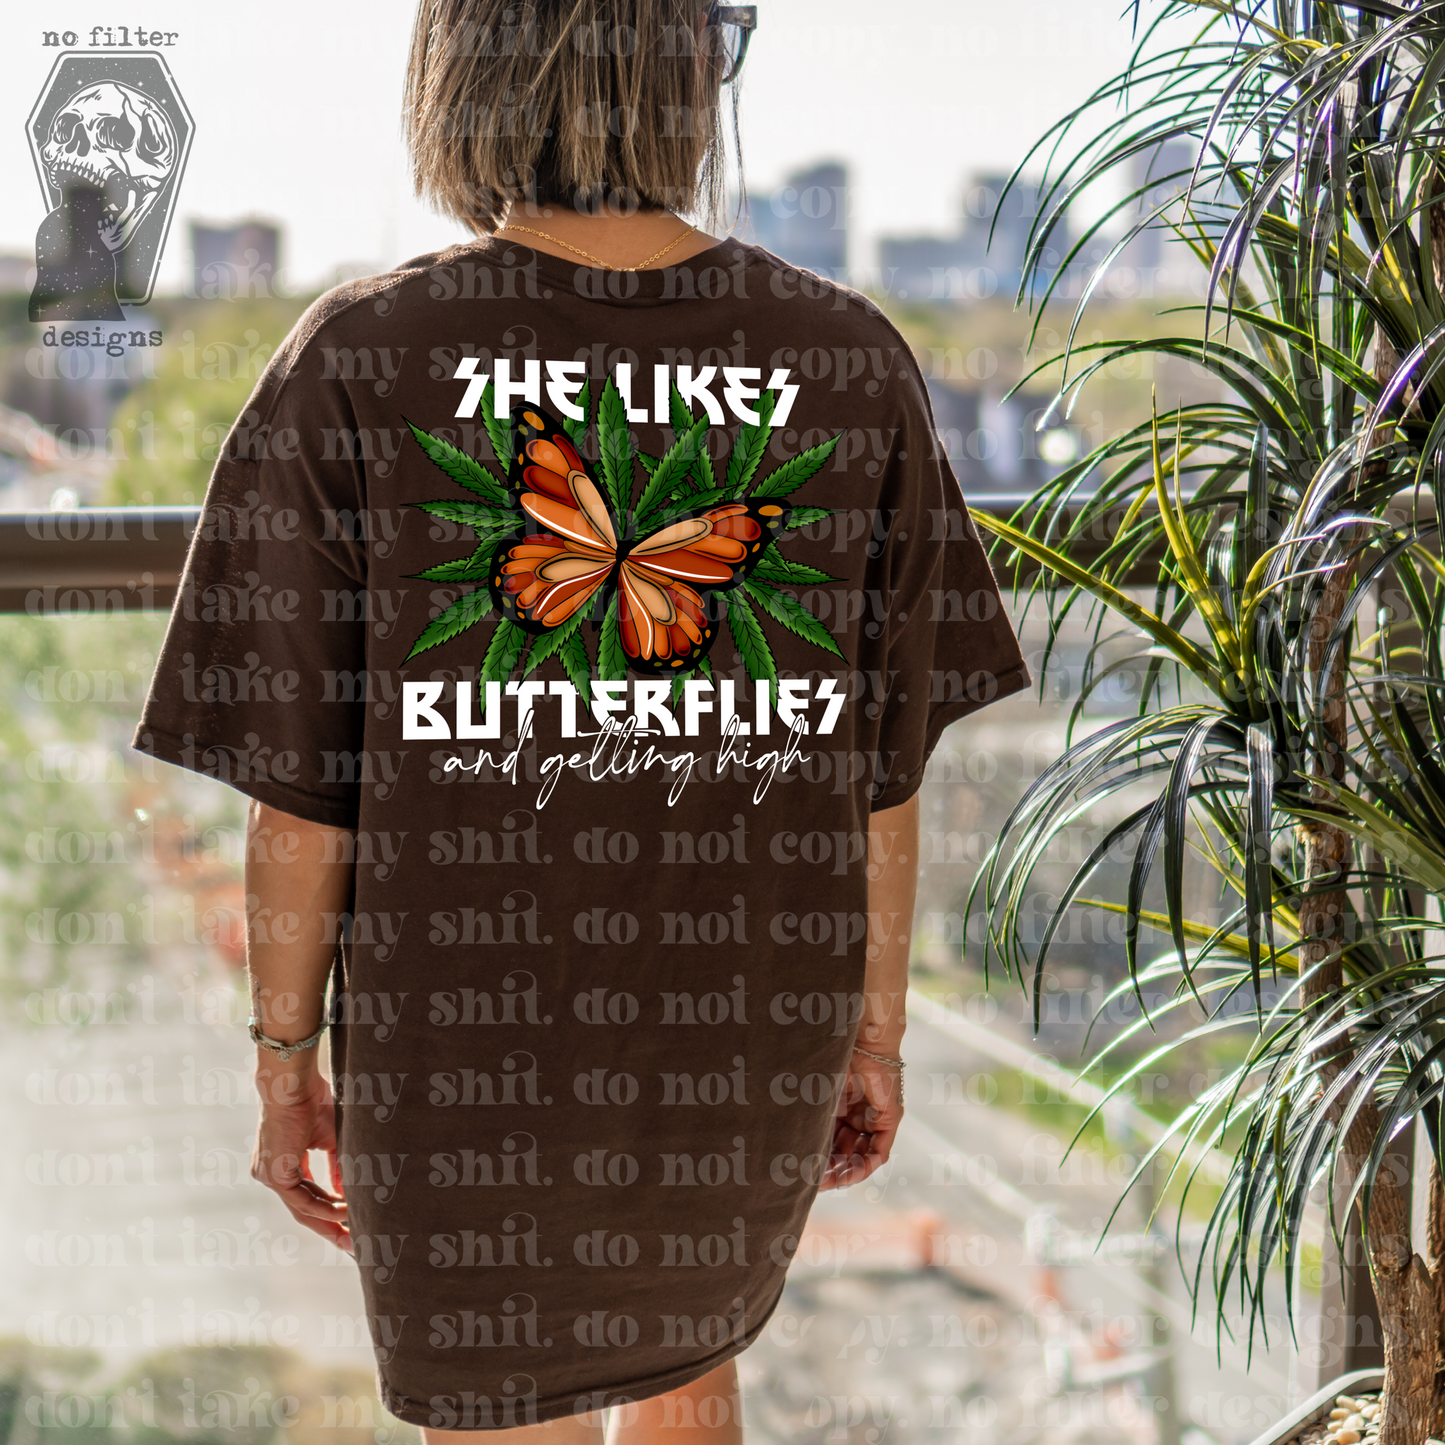 Butterflies and getting high